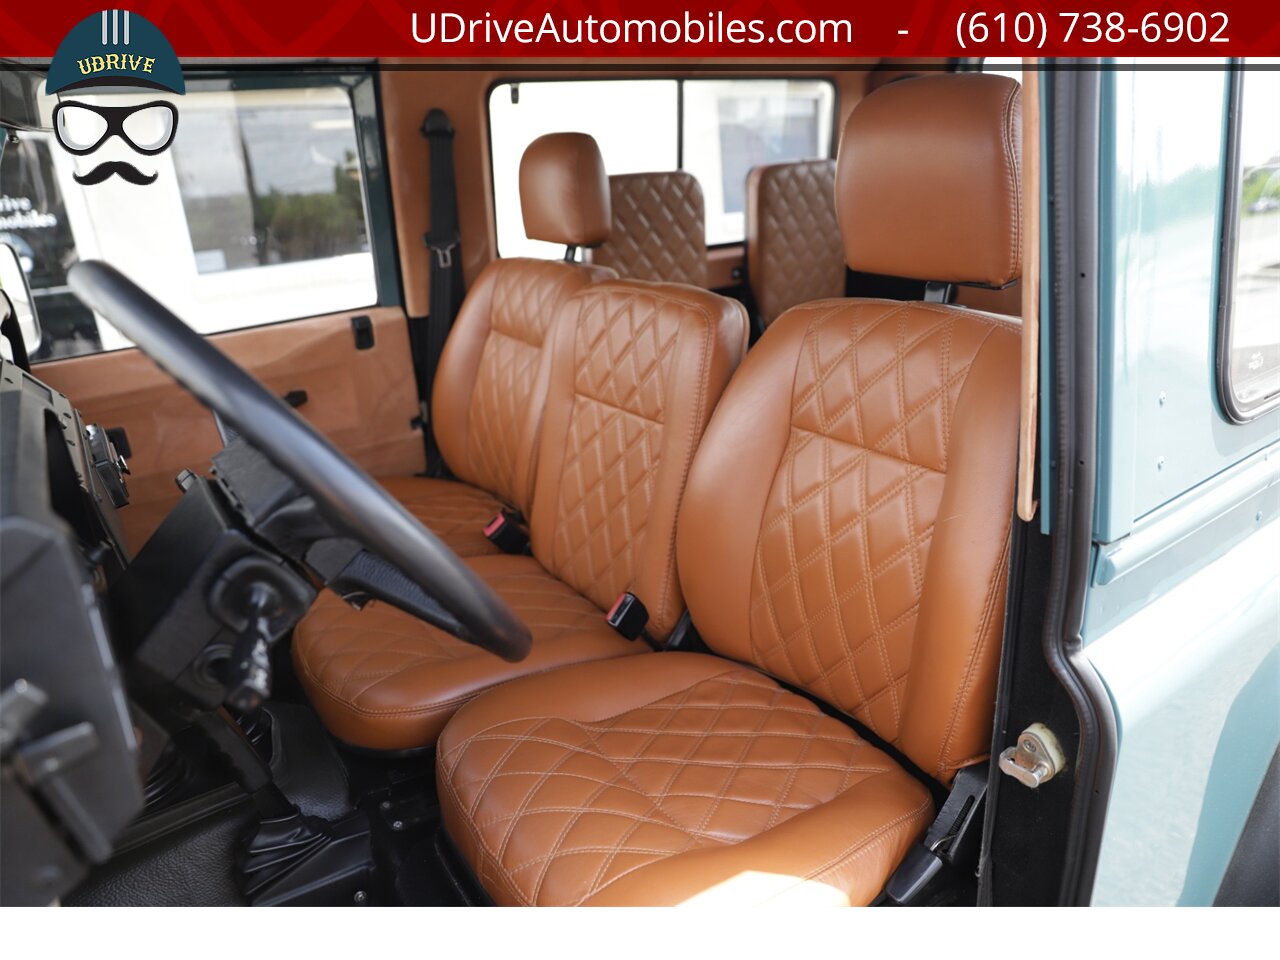 1986 Land Rover Defender 90 D90 4.0L V8 5 Speed Manual New Interior  $25k Recent Engine Build - Photo 30 - West Chester, PA 19382